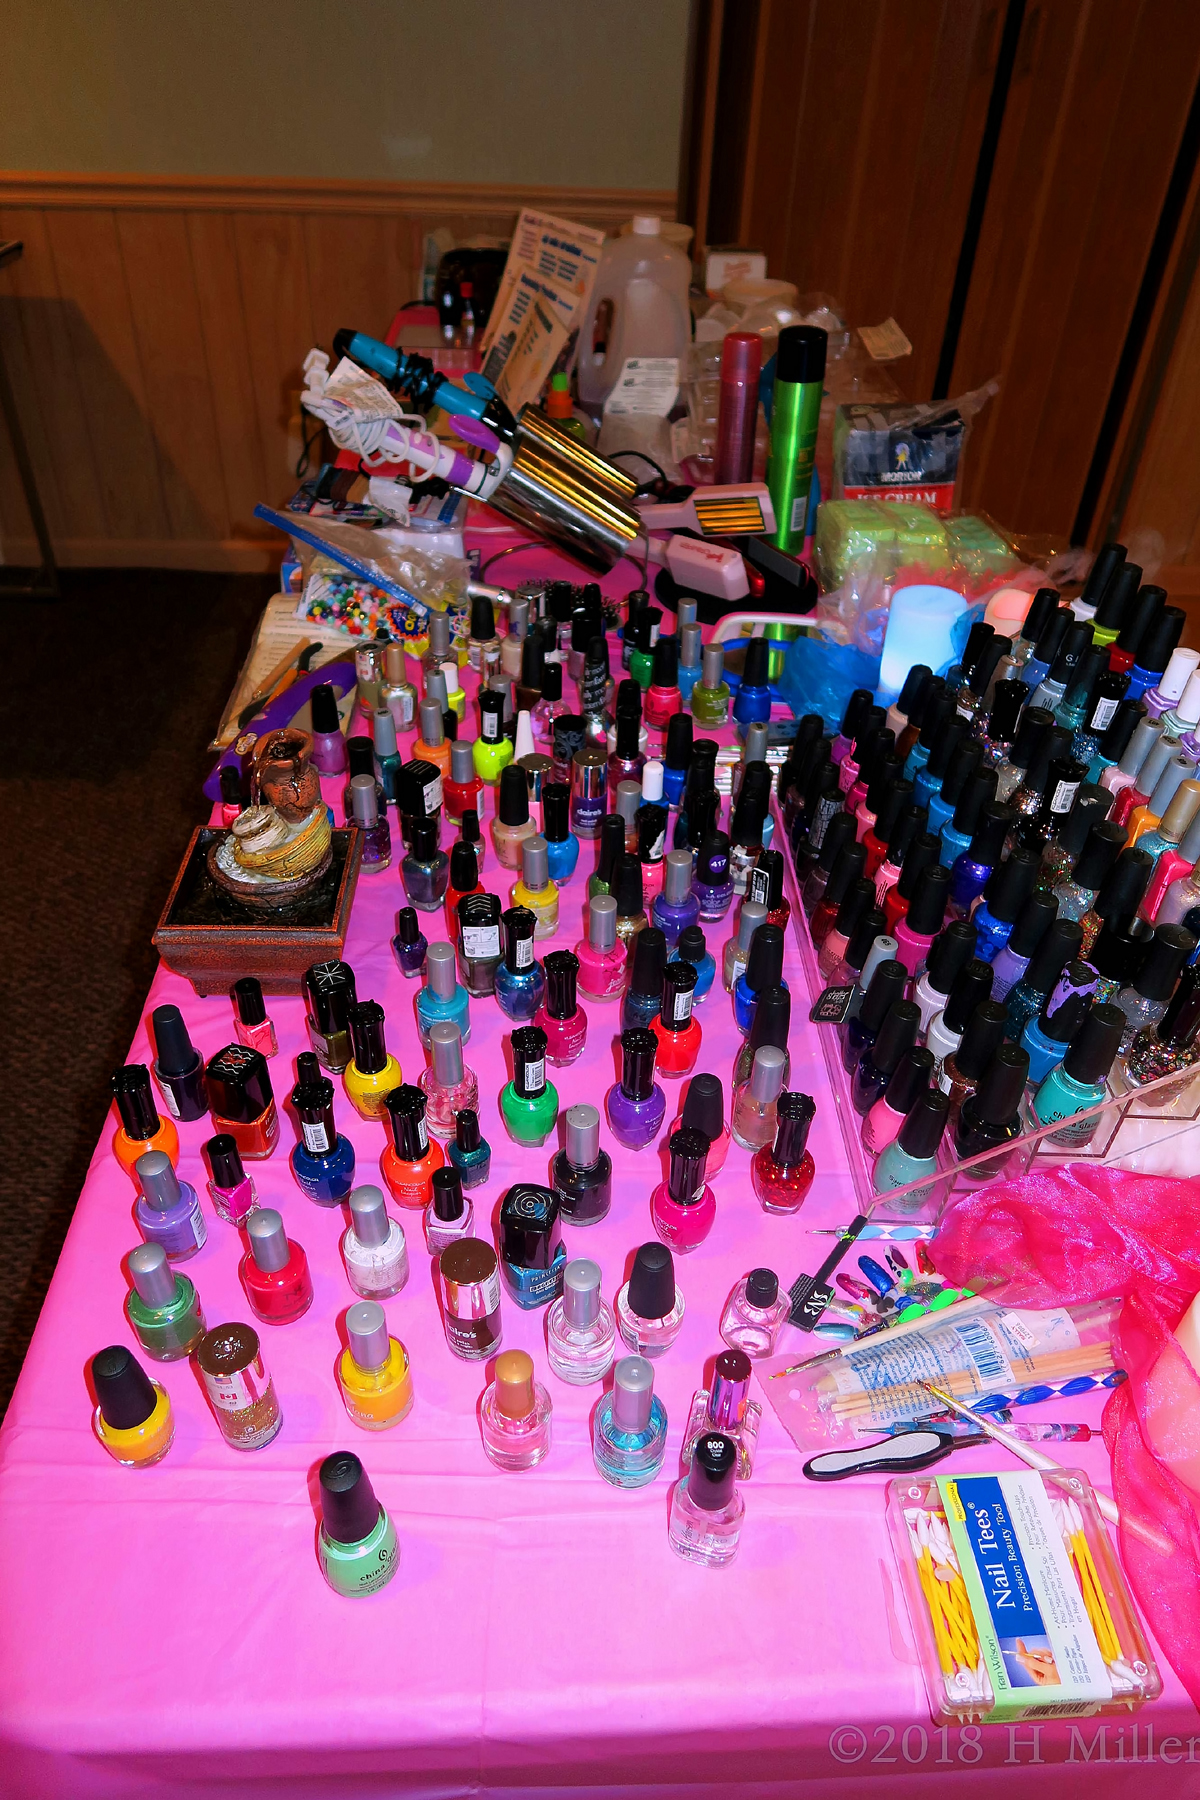 A Look At The Vast Collection Of Nail Polish Colors For Kids Manis! 